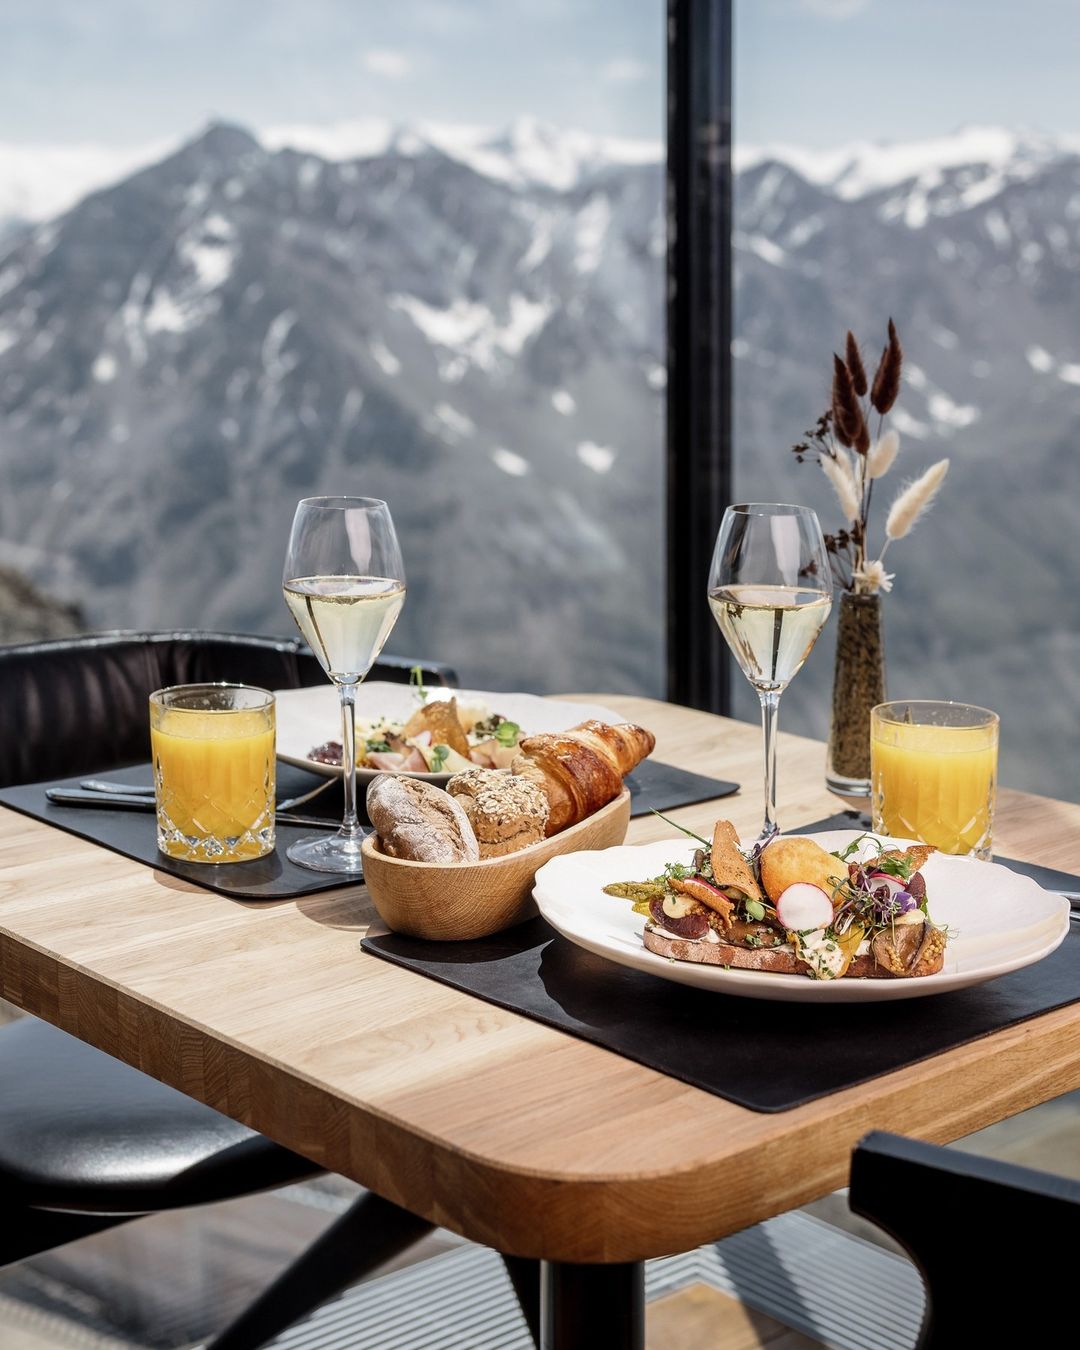 Culinary highlights of Chef de Cuisine Klaus Holzer at Ice Q at 3,000 m sea level in Sölden - Europe's 20 Best Outdoor Restaurants